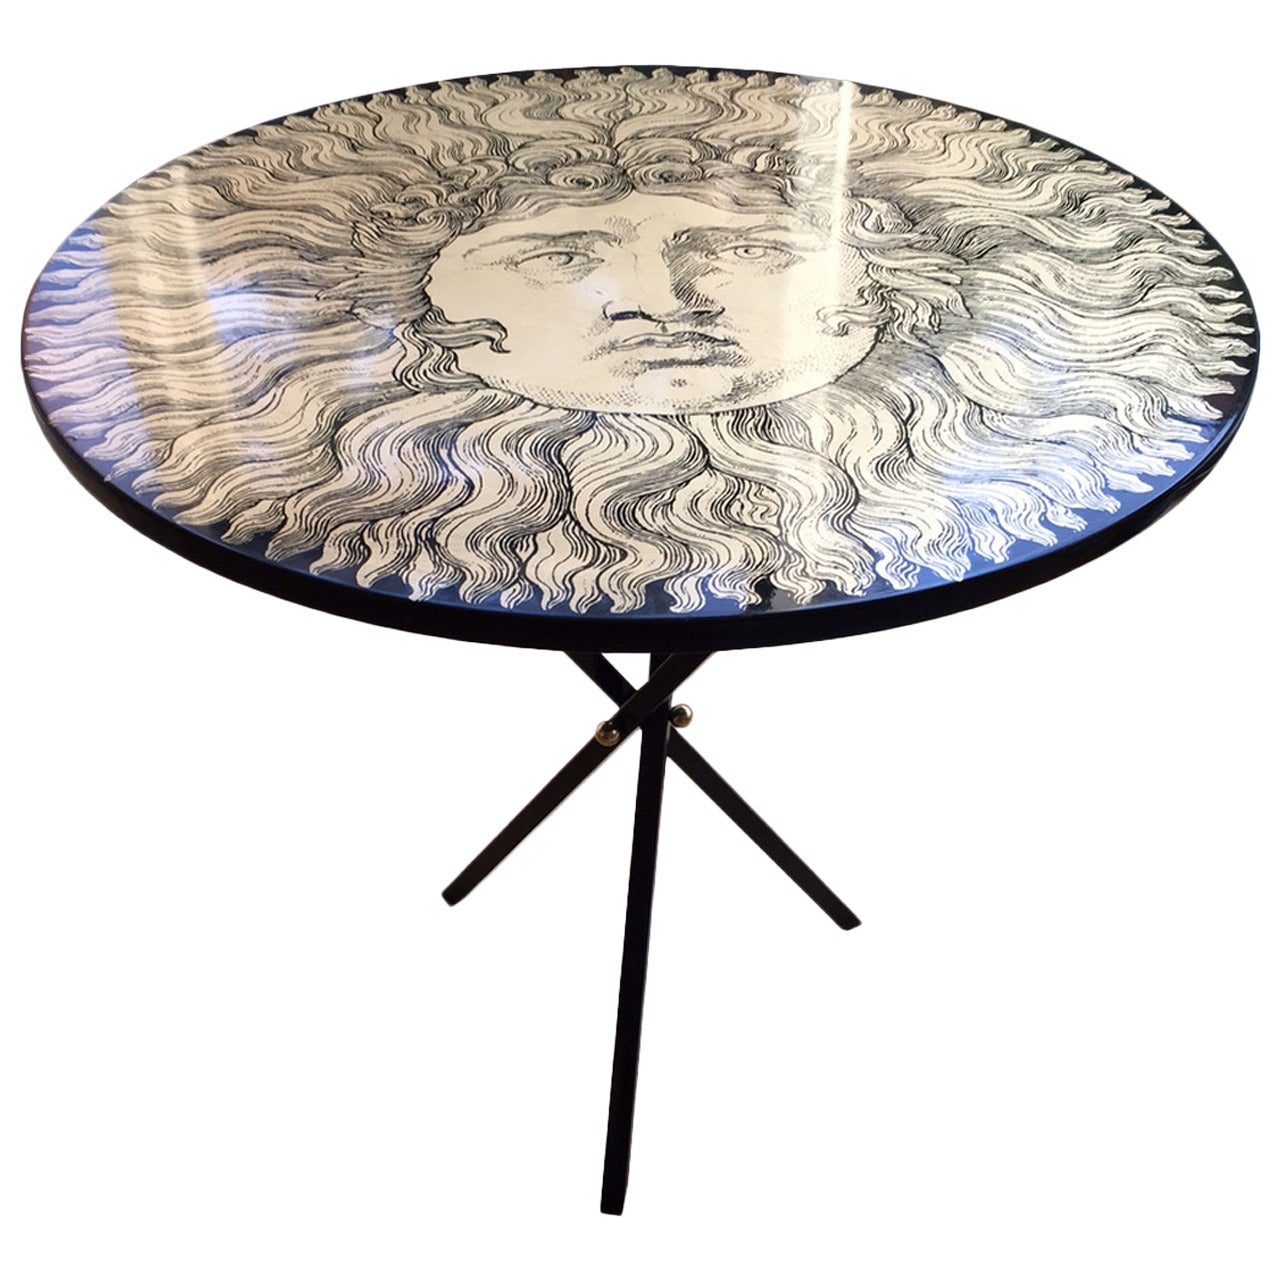 Limited Edition of Fornasetti Table Depicting Sun King with Tripod Base